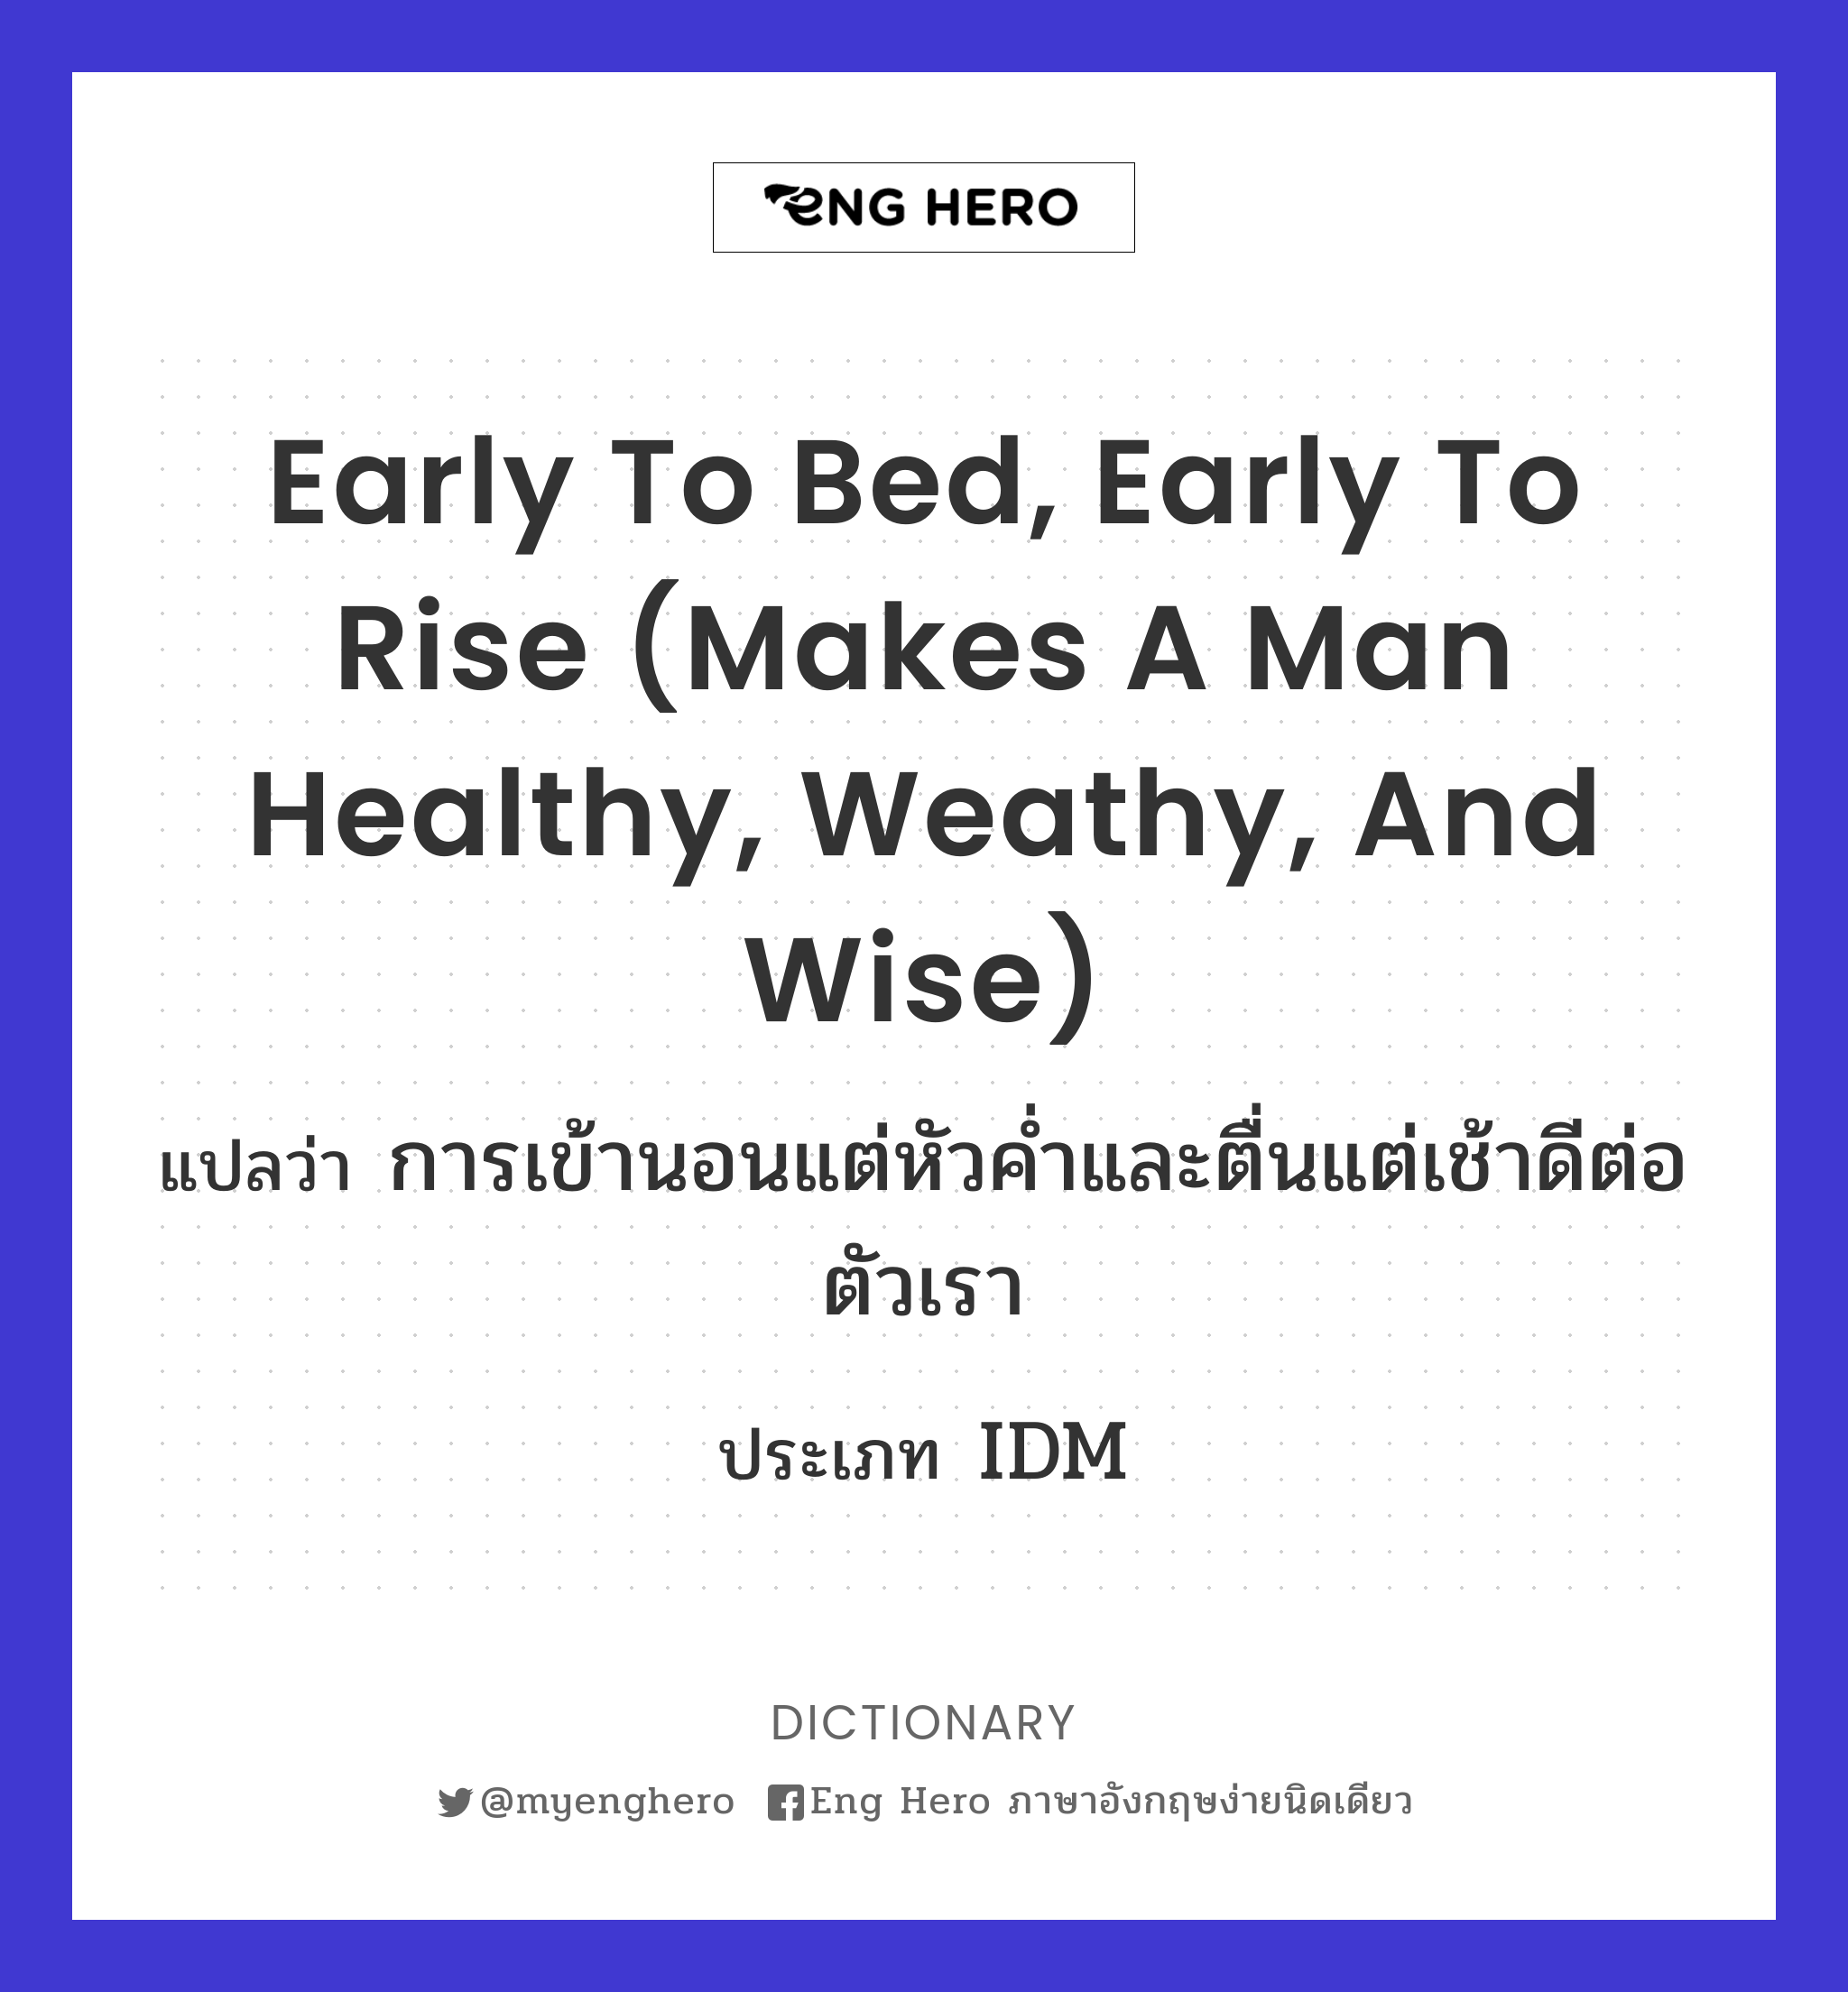 Early to bed, early to rise (makes a man healthy, weathy, and wise)